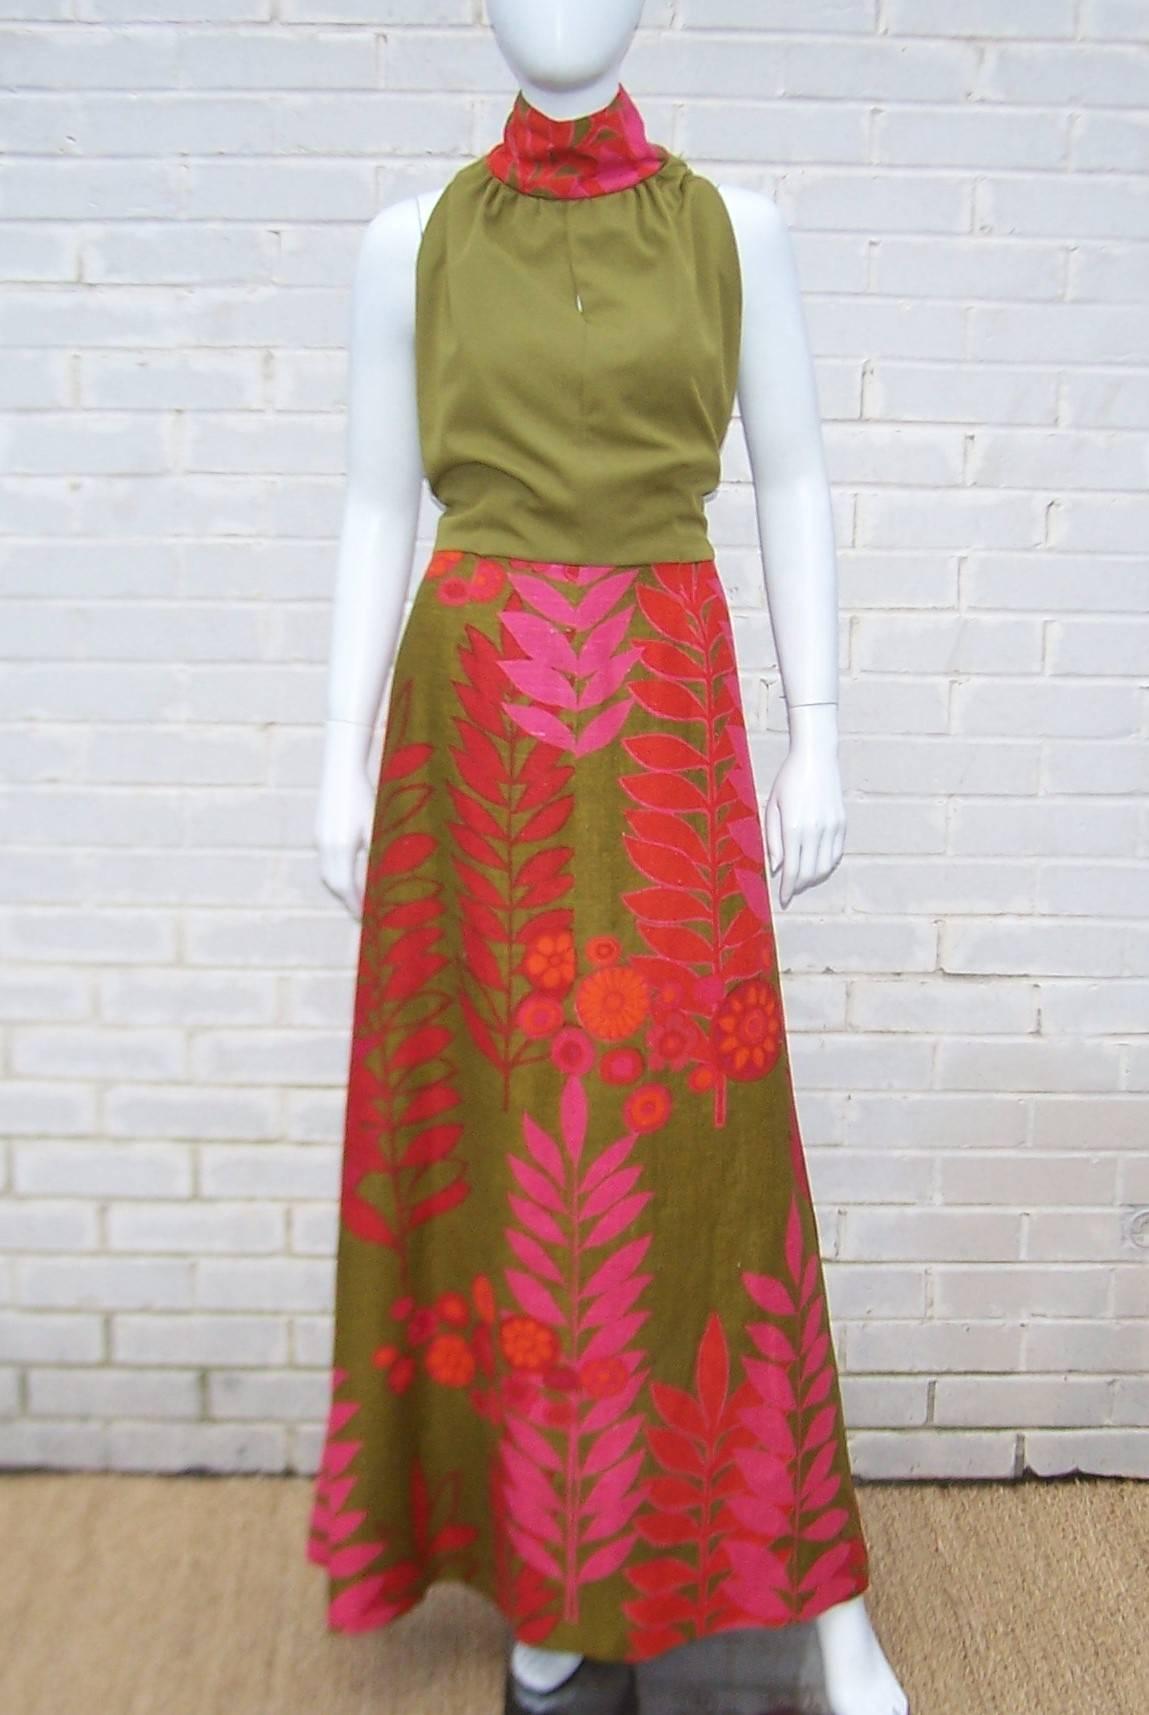 An elongated silhouette plus a vibrant fuchsia and olive green heavy linen fabric make for a stunning combination of mod glamour in this two piece C.1970 ensemble.  The maxi dress zips and hooks at the back with a polyester crepe keyhole bodice and